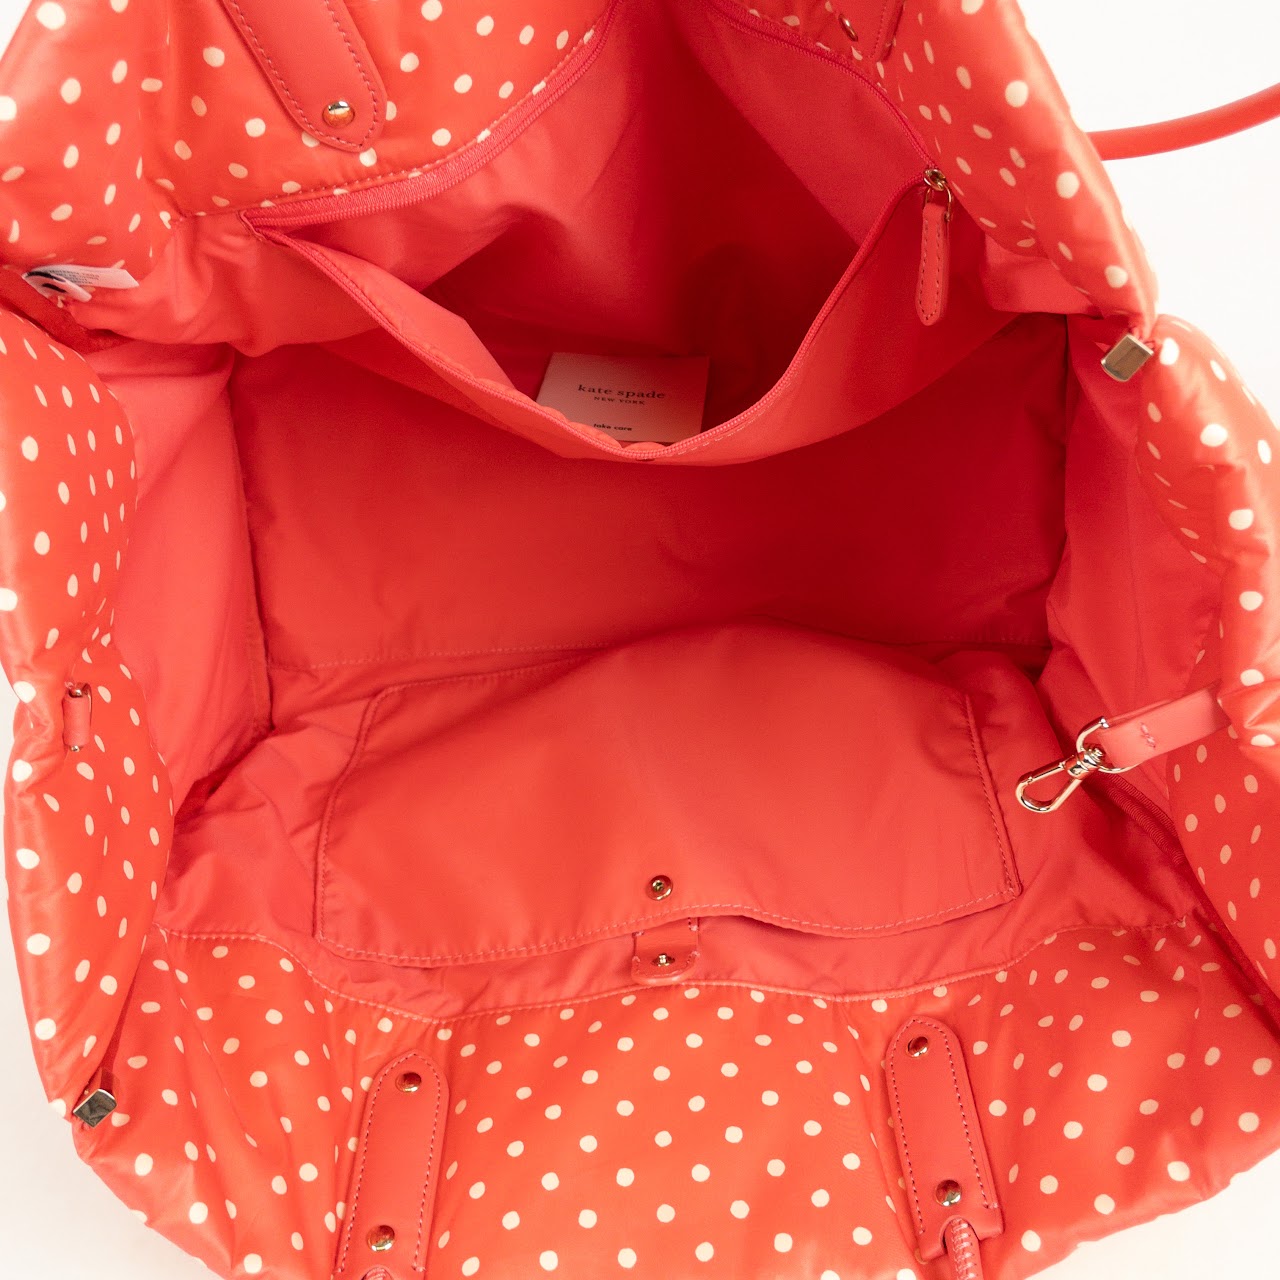 Kate Spade Quilted Polka Dot Tote